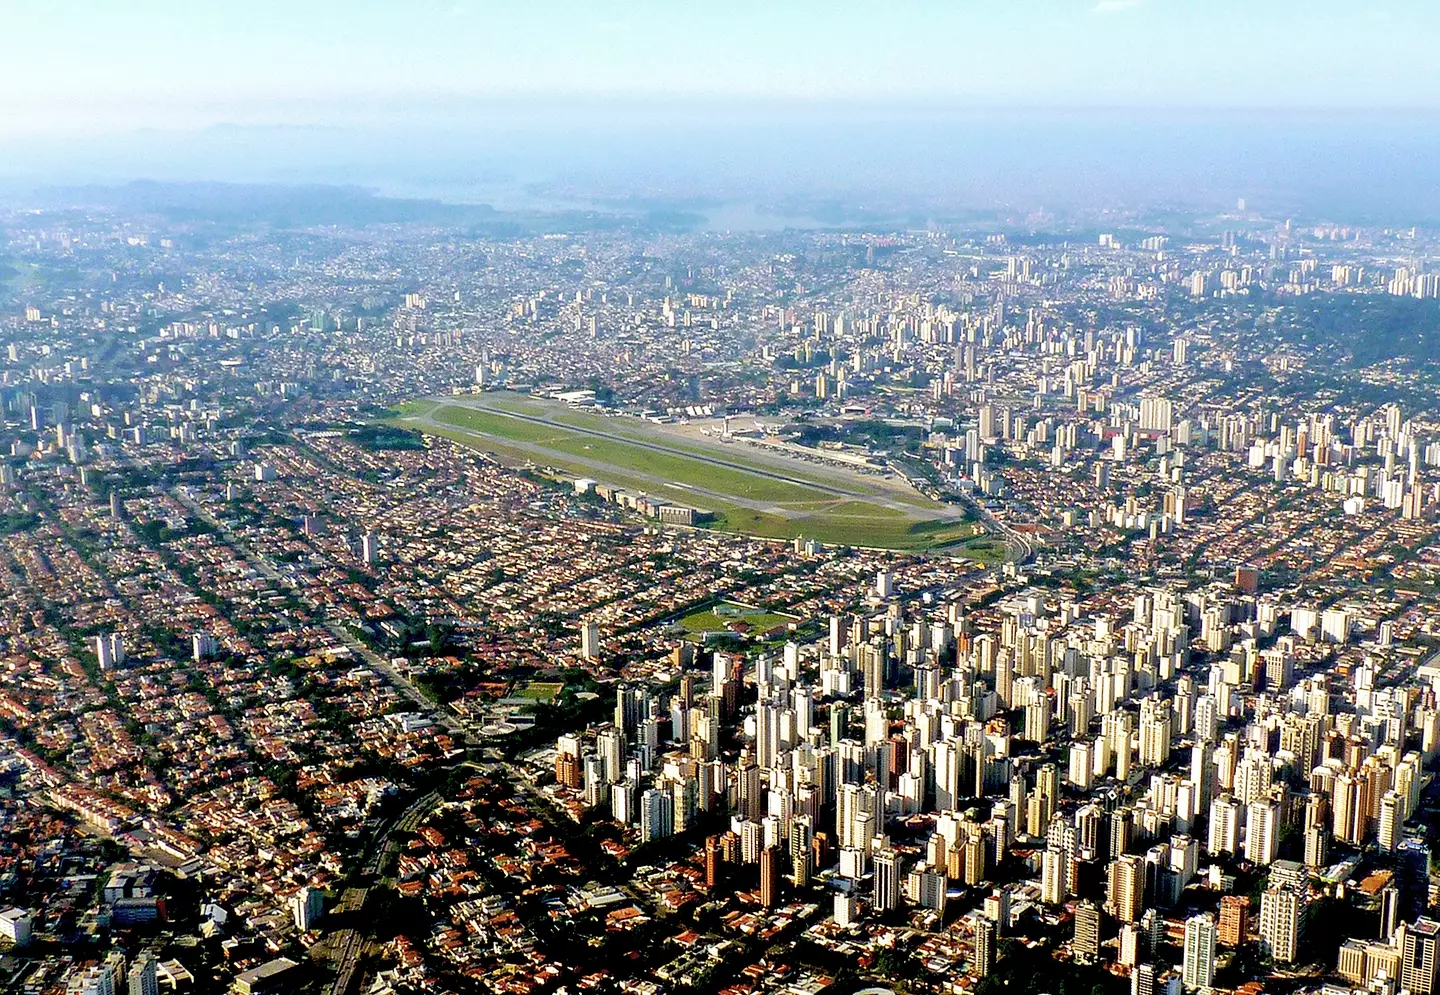 This Brazilian airport in the heart of the city.